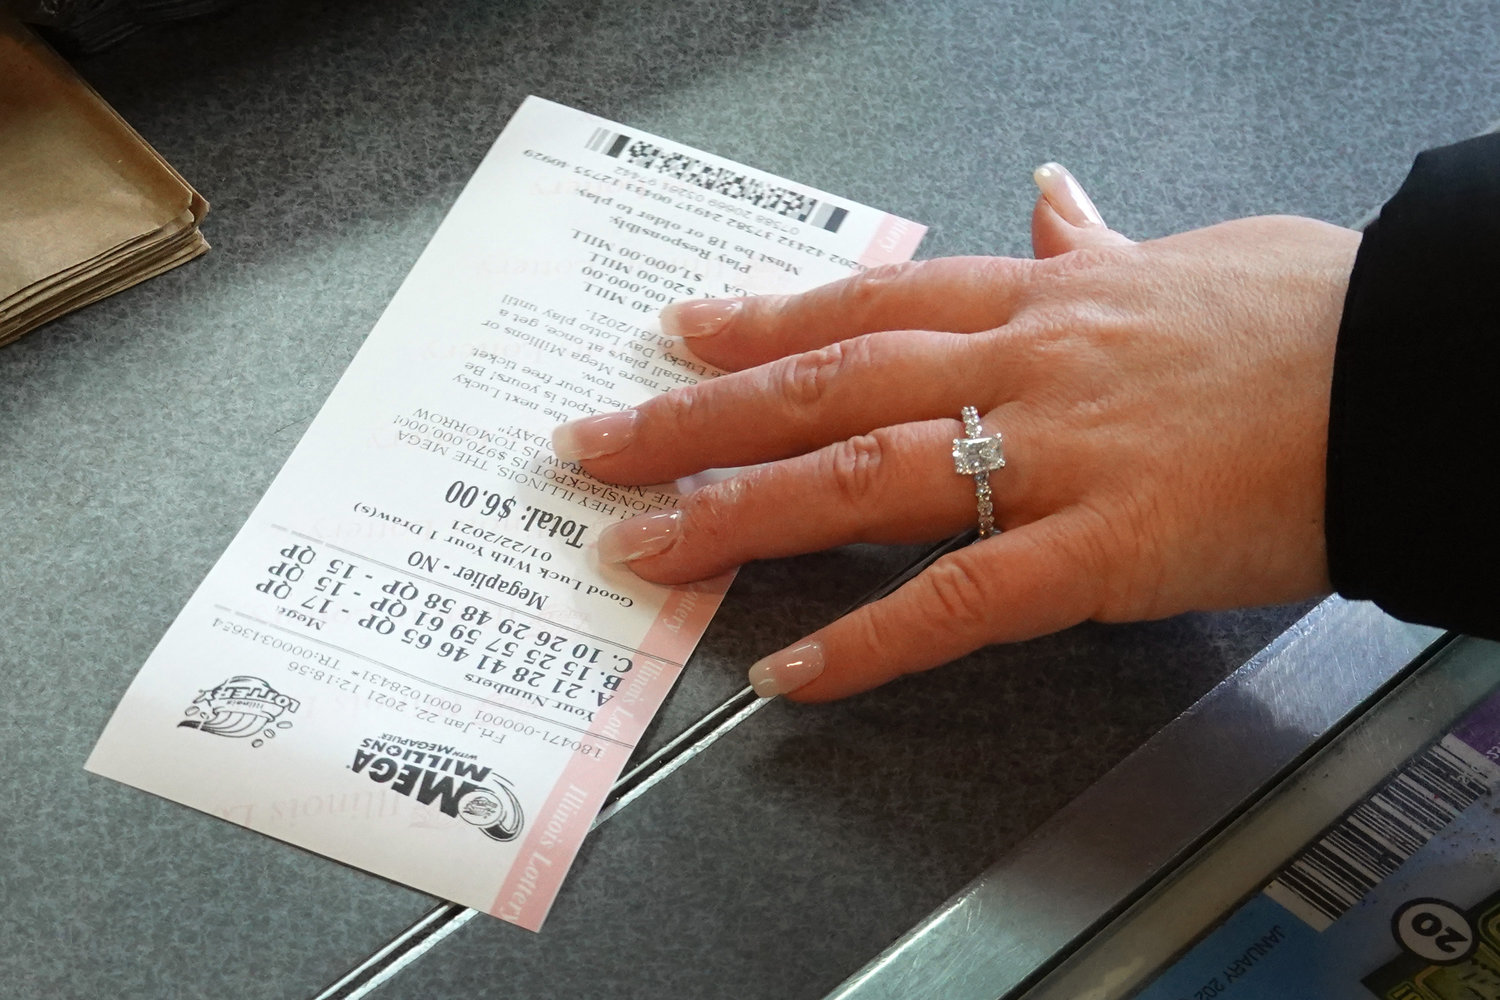 A customer purchases a Mega Millions lottery ticket at a 7-Eleven store in Chicago. (Scott Olson/Getty Images/TNS)